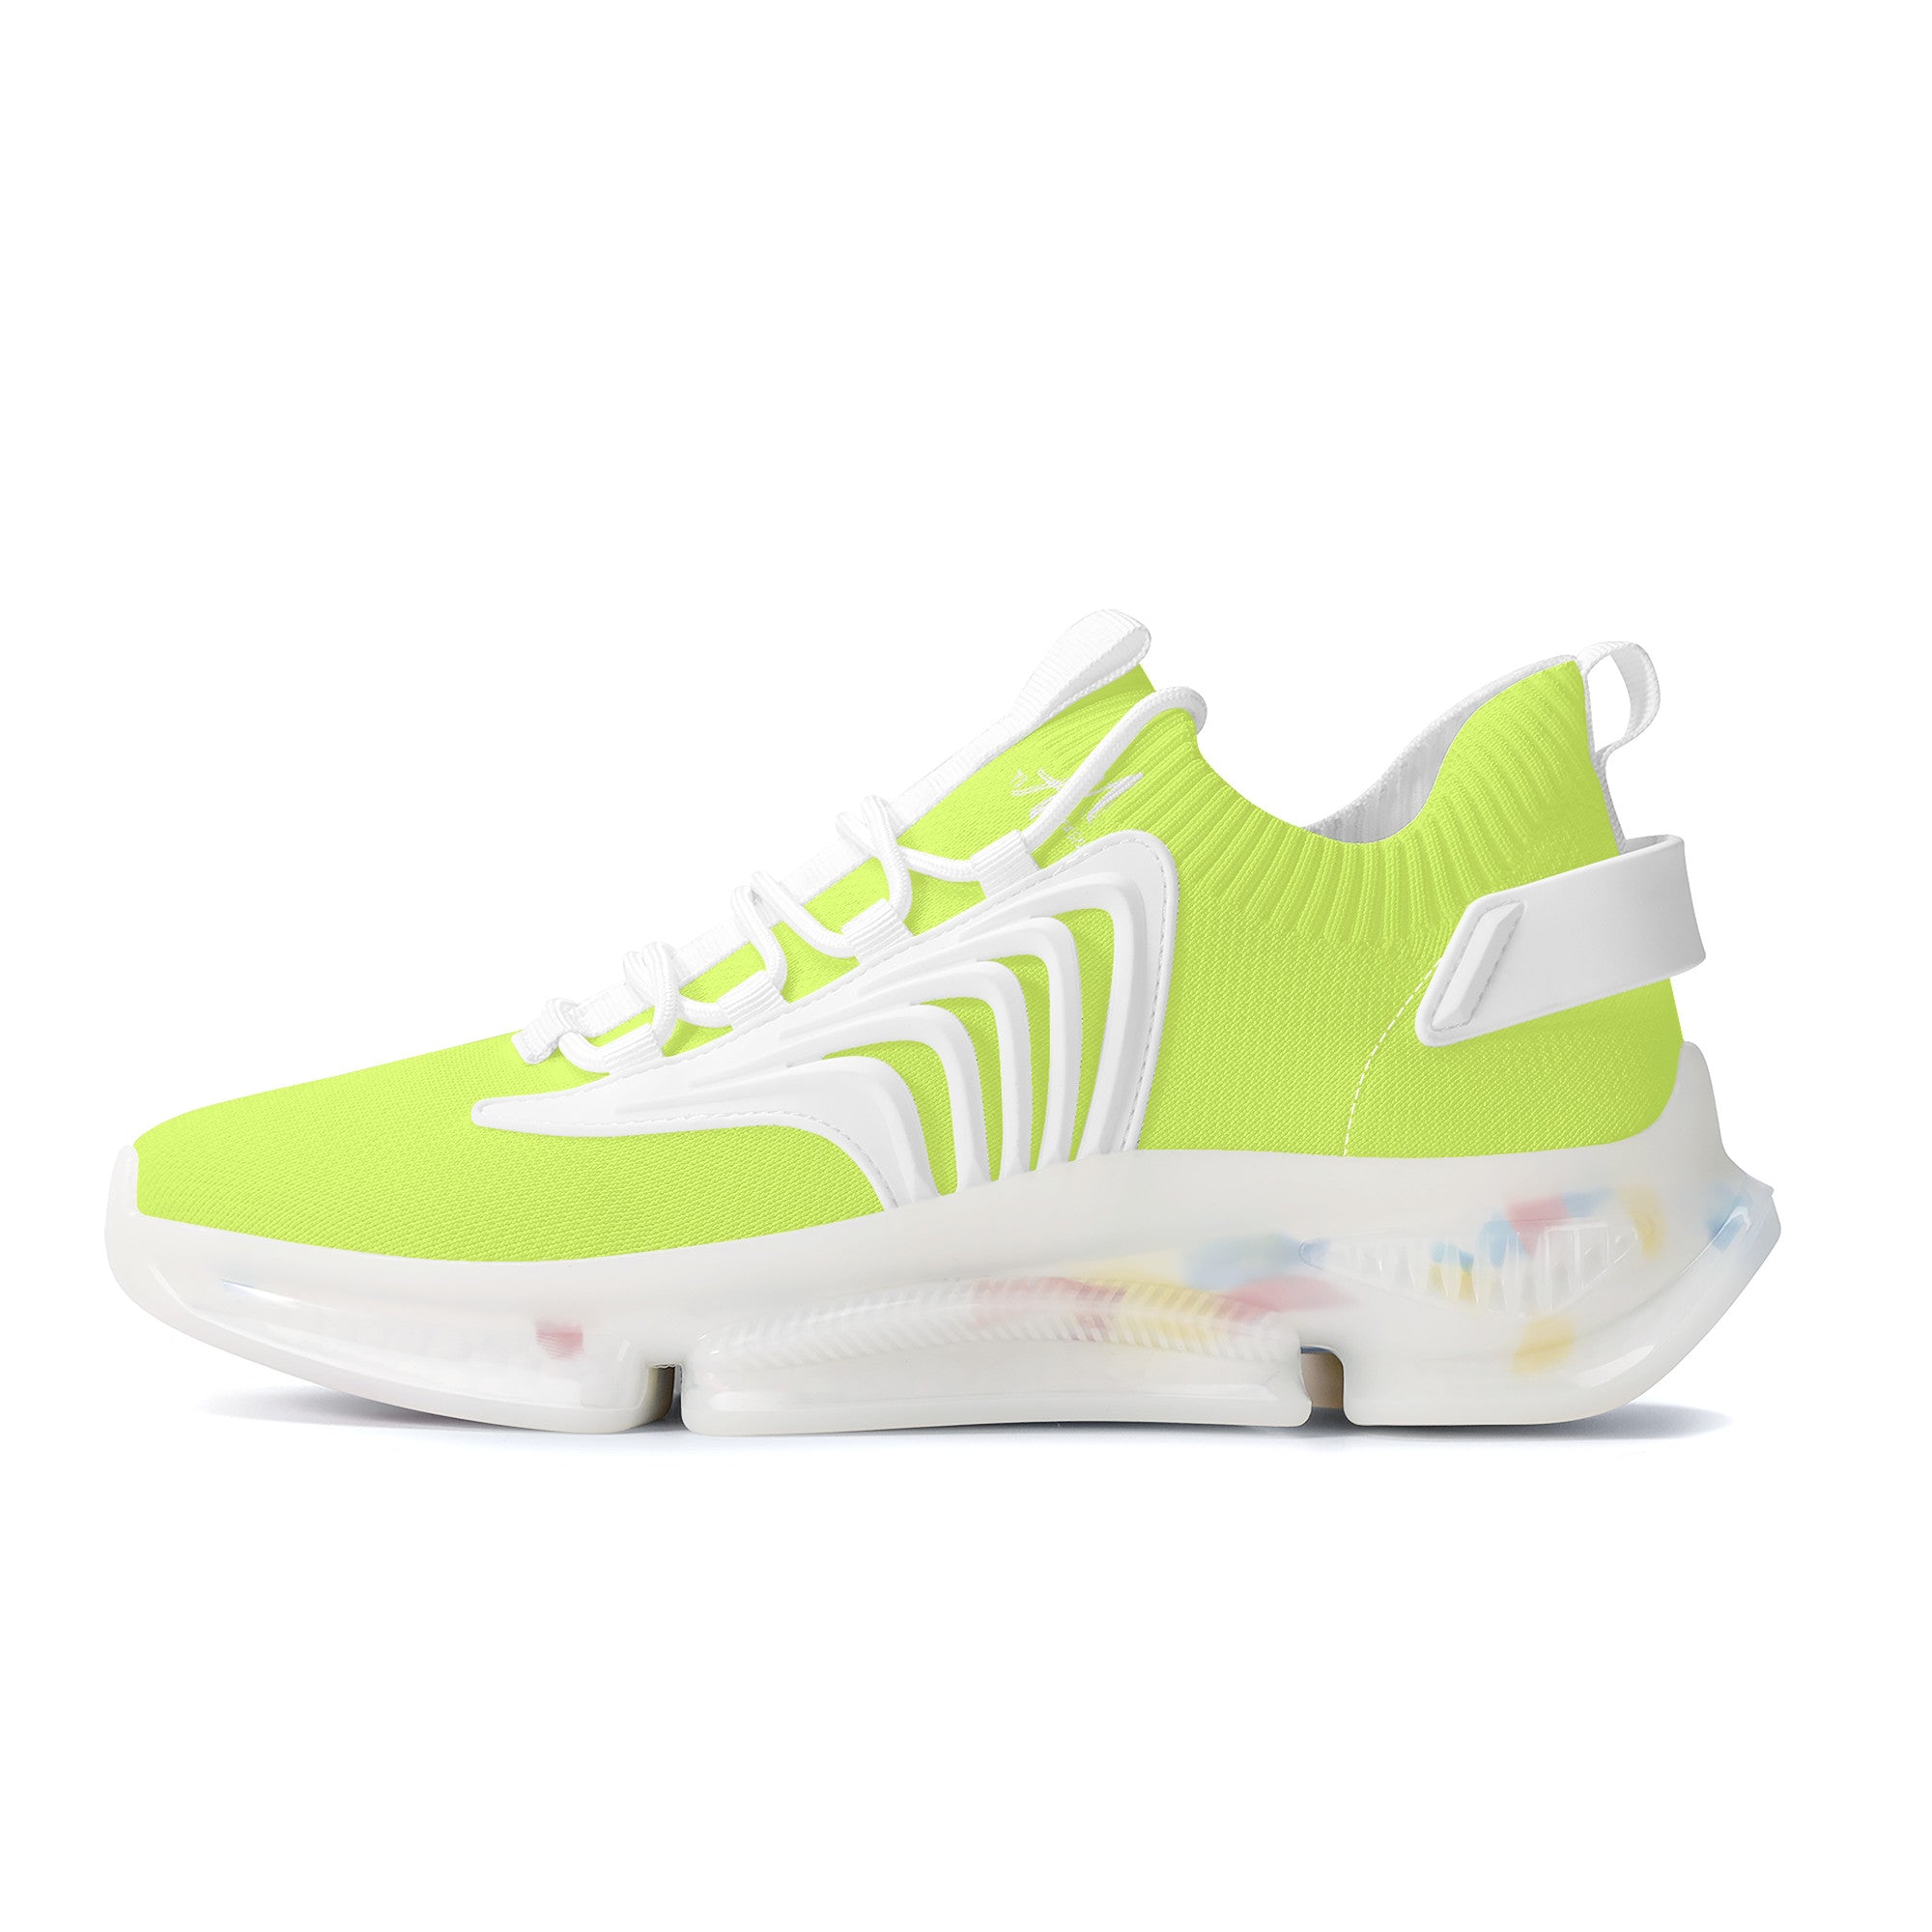 Manifest React Air Max Sneakers - Tennis Ball Lime-fashion-shoes-running-jump rope- summer-spring-walking-play-gym